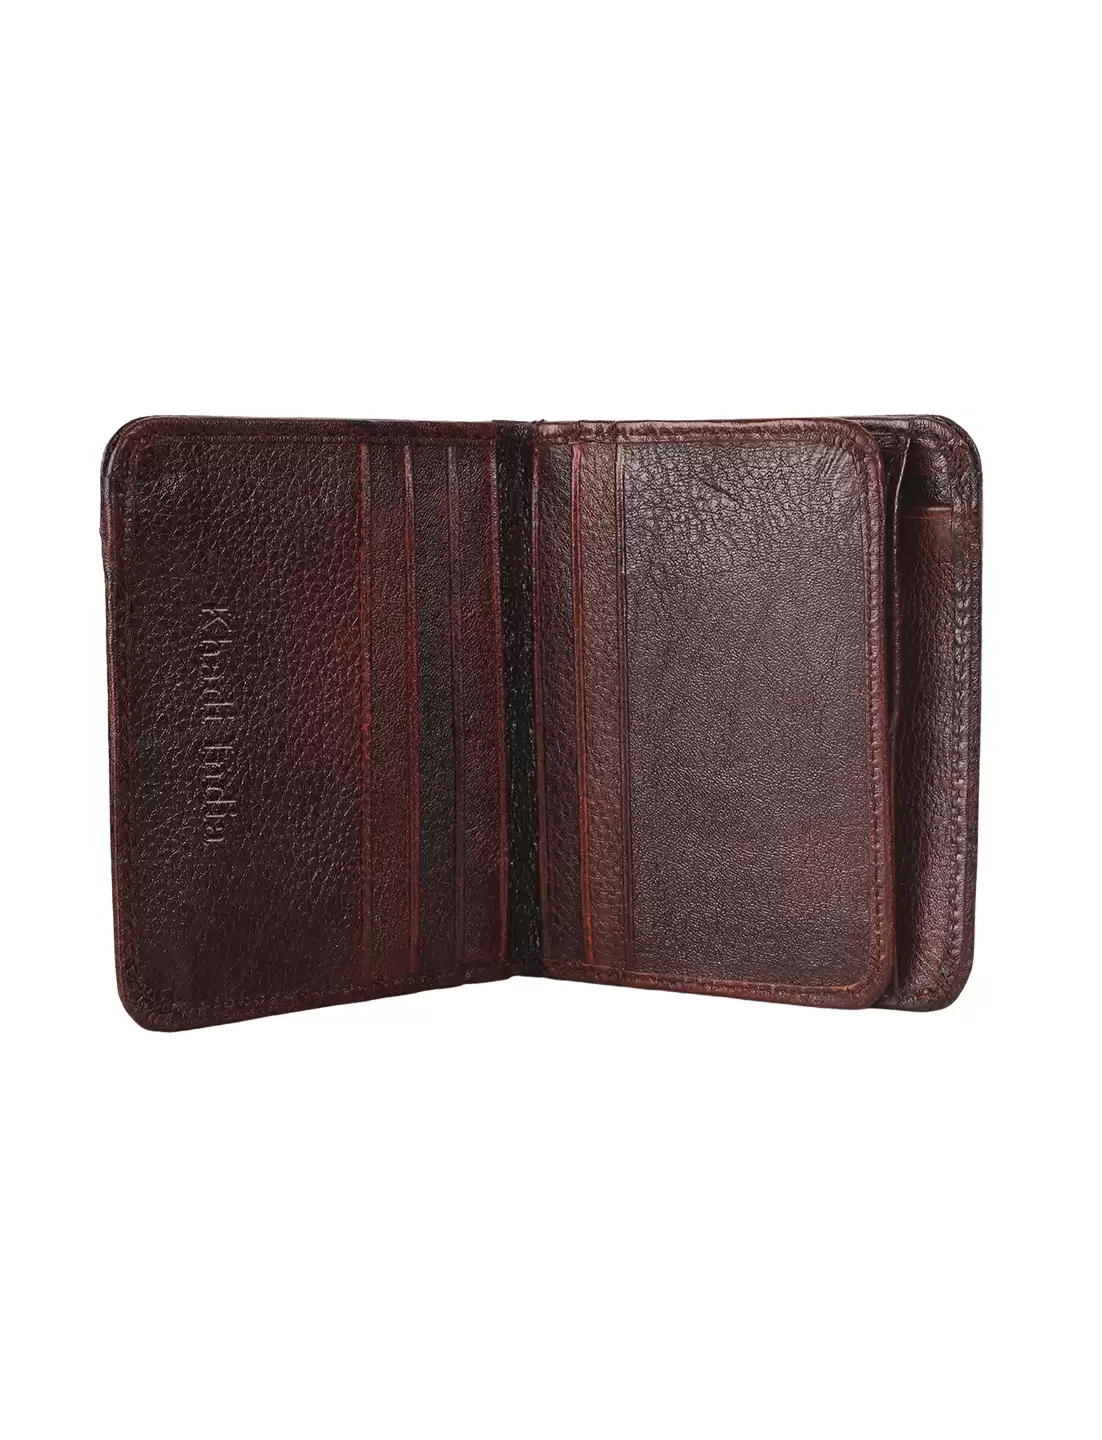 Buy ZORO Men's Wallet, Simple Purse, Gents Wallet, Gents Purse for Men  Brown/Tan Colour, Compact, Small Front Pocket Wallet 39T at Amazon.in